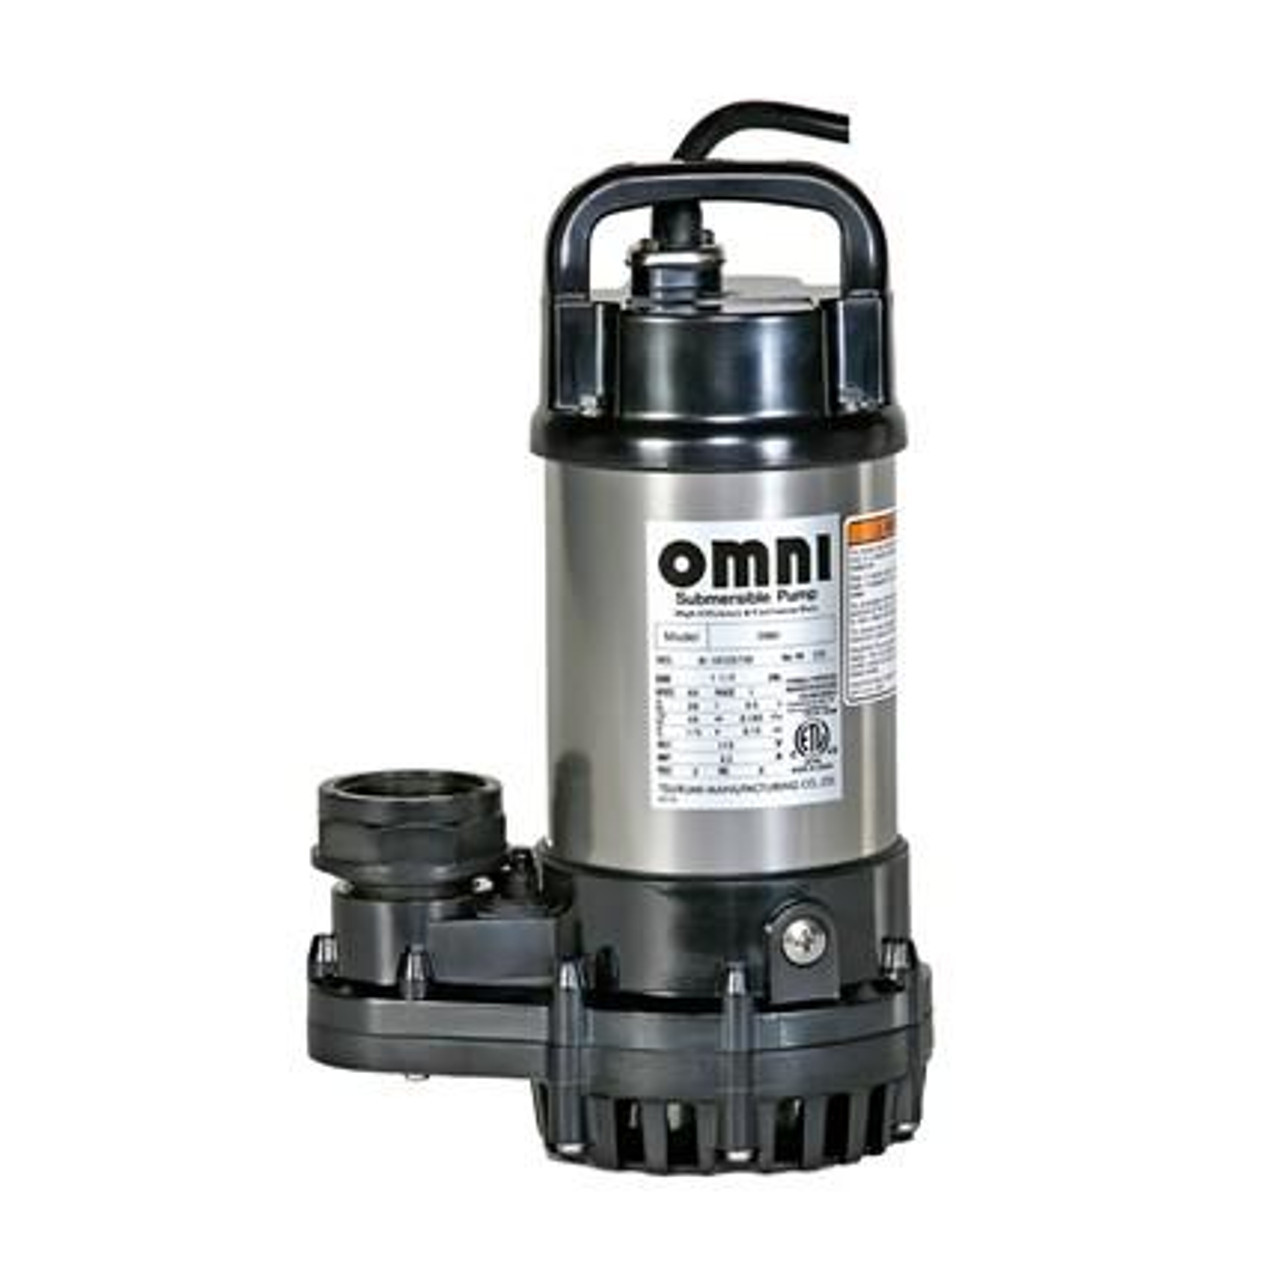 Submersible Water Pump Buyer's Guide - How to Pick the Perfect Submersible  Water Pump